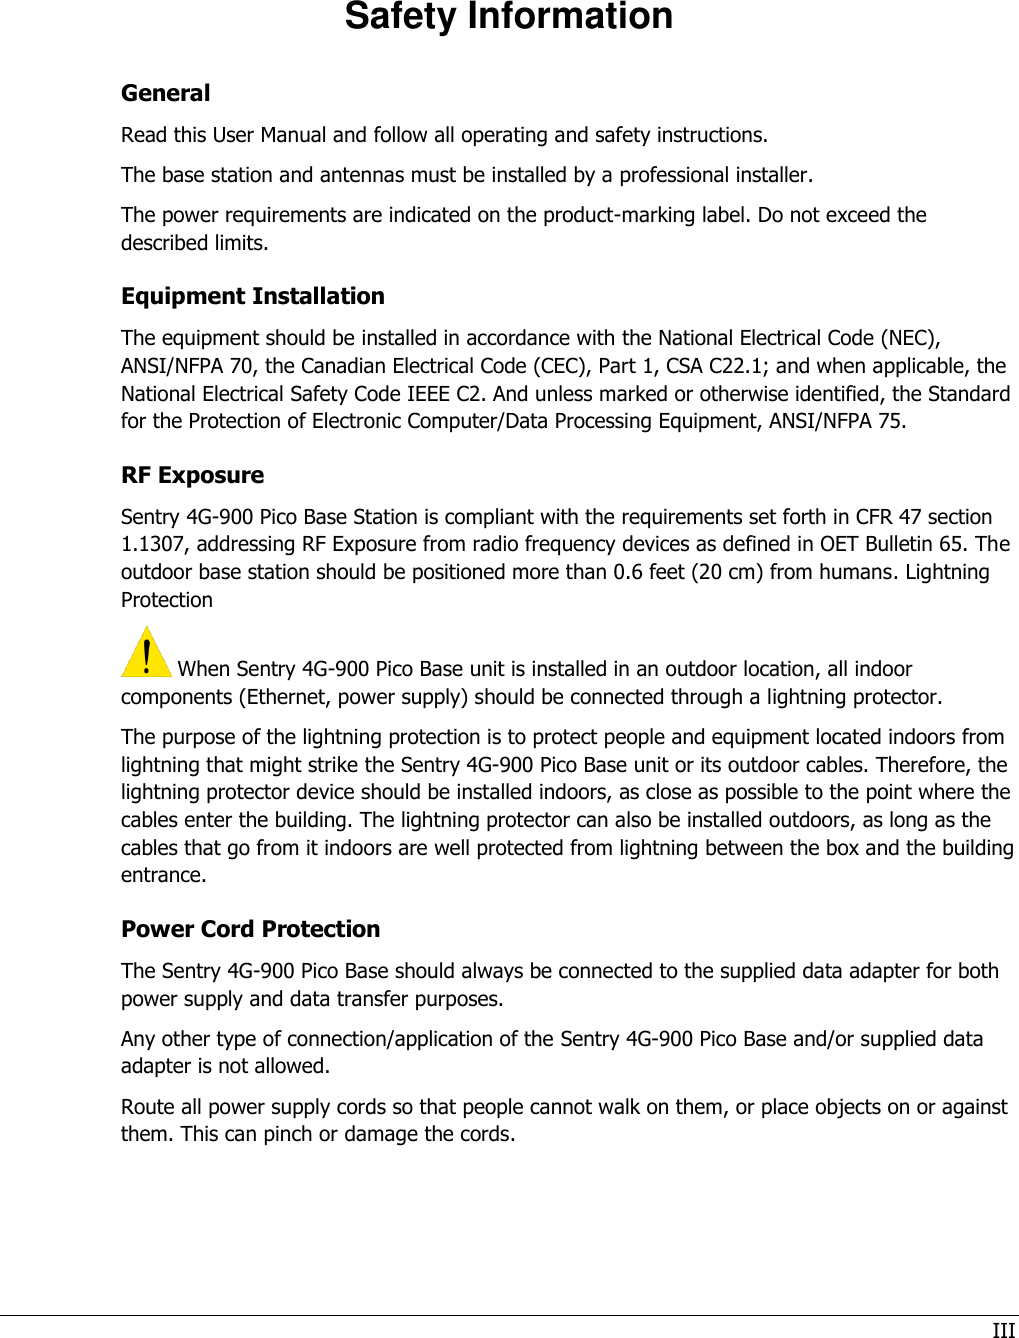 III   Safety Information General Read this User Manual and follow all operating and safety instructions. The base station and antennas must be installed by a professional installer. The power requirements are indicated on the product-marking label. Do not exceed the described limits.  Equipment Installation The equipment should be installed in accordance with the National Electrical Code (NEC), ANSI/NFPA 70, the Canadian Electrical Code (CEC), Part 1, CSA C22.1; and when applicable, the National Electrical Safety Code IEEE C2. And unless marked or otherwise identified, the Standard for the Protection of Electronic Computer/Data Processing Equipment, ANSI/NFPA 75. RF Exposure  Sentry 4G-900 Pico Base Station is compliant with the requirements set forth in CFR 47 section 1.1307, addressing RF Exposure from radio frequency devices as defined in OET Bulletin 65. The outdoor base station should be positioned more than 0.6 feet (20 cm) from humans. Lightning Protection  When Sentry 4G-900 Pico Base unit is installed in an outdoor location, all indoor components (Ethernet, power supply) should be connected through a lightning protector. The purpose of the lightning protection is to protect people and equipment located indoors from lightning that might strike the Sentry 4G-900 Pico Base unit or its outdoor cables. Therefore, the lightning protector device should be installed indoors, as close as possible to the point where the cables enter the building. The lightning protector can also be installed outdoors, as long as the cables that go from it indoors are well protected from lightning between the box and the building entrance. Power Cord Protection The Sentry 4G-900 Pico Base should always be connected to the supplied data adapter for both power supply and data transfer purposes. Any other type of connection/application of the Sentry 4G-900 Pico Base and/or supplied data adapter is not allowed. Route all power supply cords so that people cannot walk on them, or place objects on or against them. This can pinch or damage the cords. 